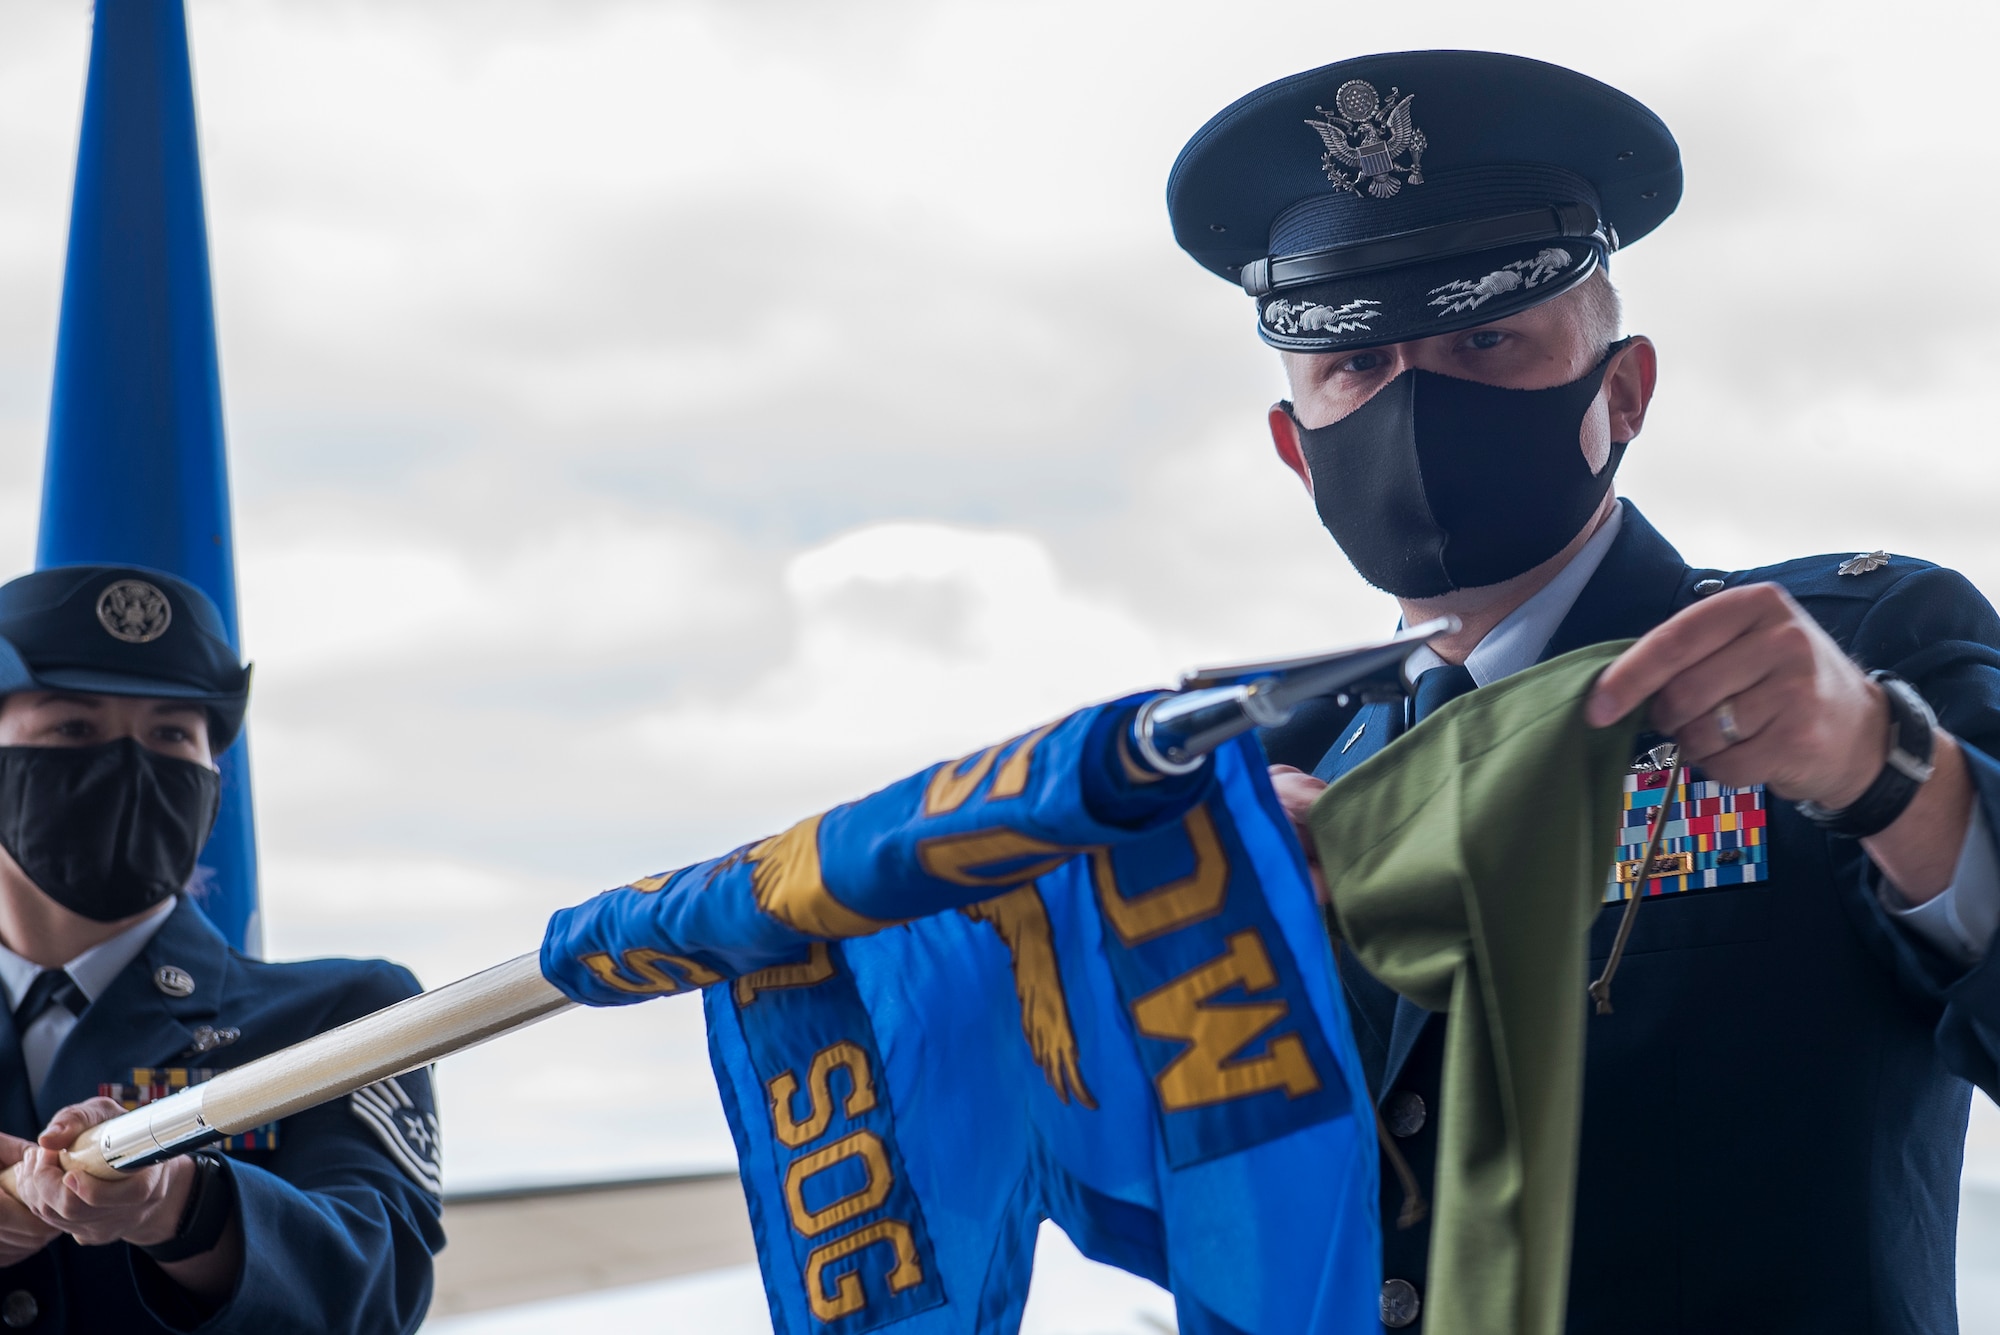 Air Force Lt. Col. Joshua Stinson, 310th Special Operations Squadron commander, puts away the guidon for the 27th Special Operations Detachment 1, at the 310 SOS activation ceremony at Cannon Air Force Base, N.M., May 4, 2021. The 310 SOS was activated recently to align with the Air Force Special Operations Command’s new deployment plans, providing a more sustainable and predictable deployment cycle to allow Air Commandos more time at home station to develop themselves and the culture of the squadron. (U.S. Air Force photo by Senior Airman Vernon R. Walter III)